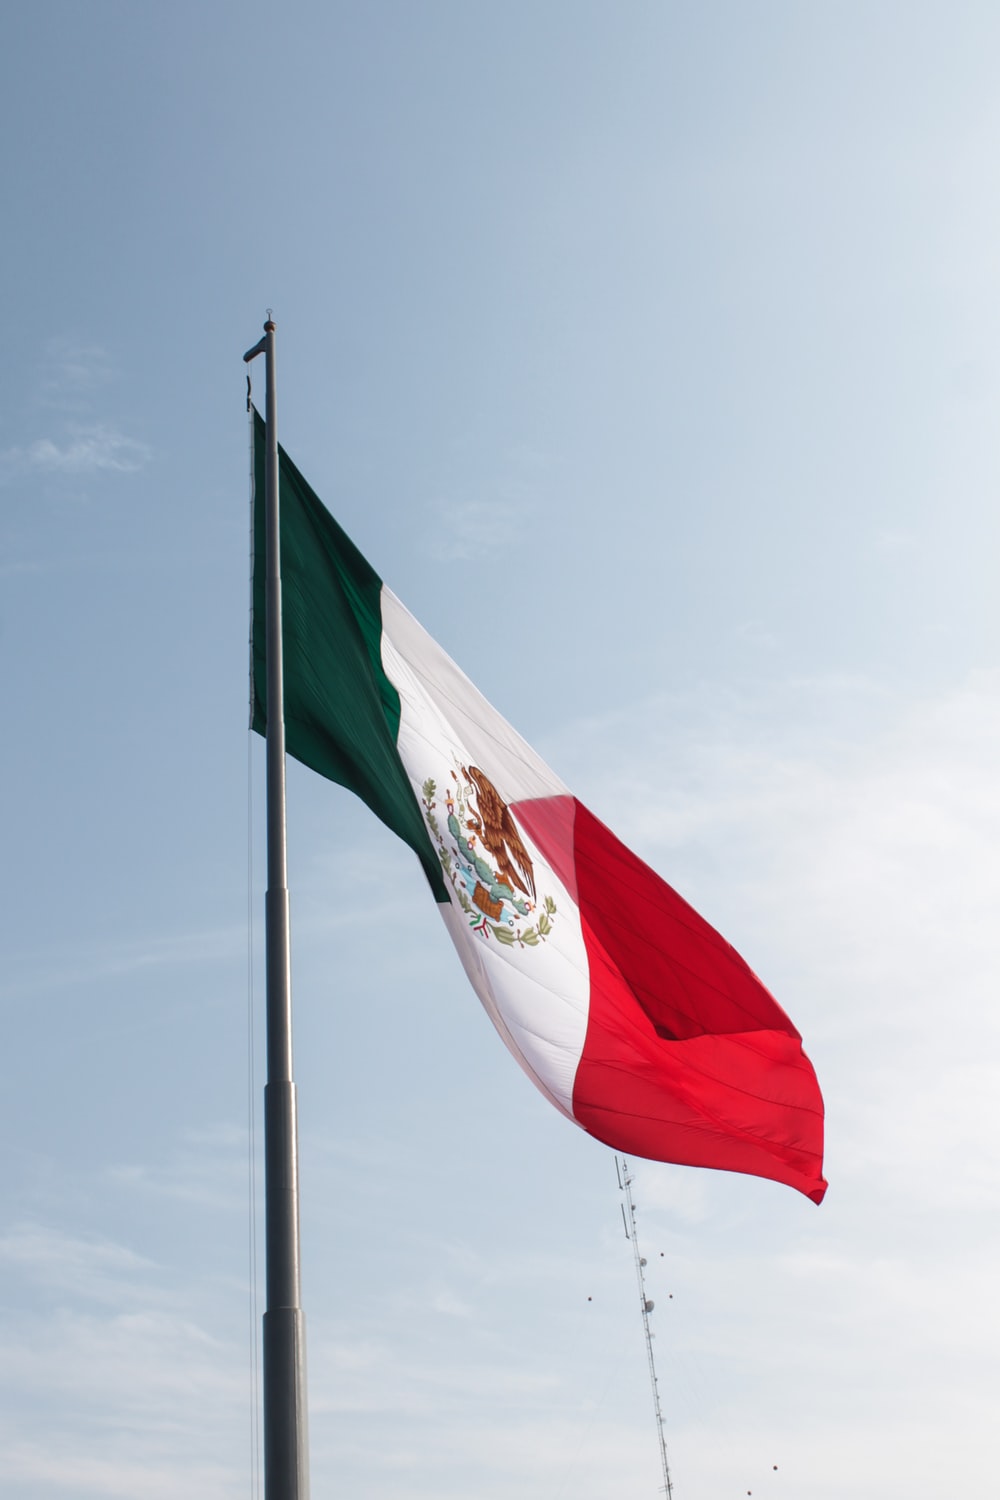 Best Mexican Flag Picture [HD]. Download Free Image